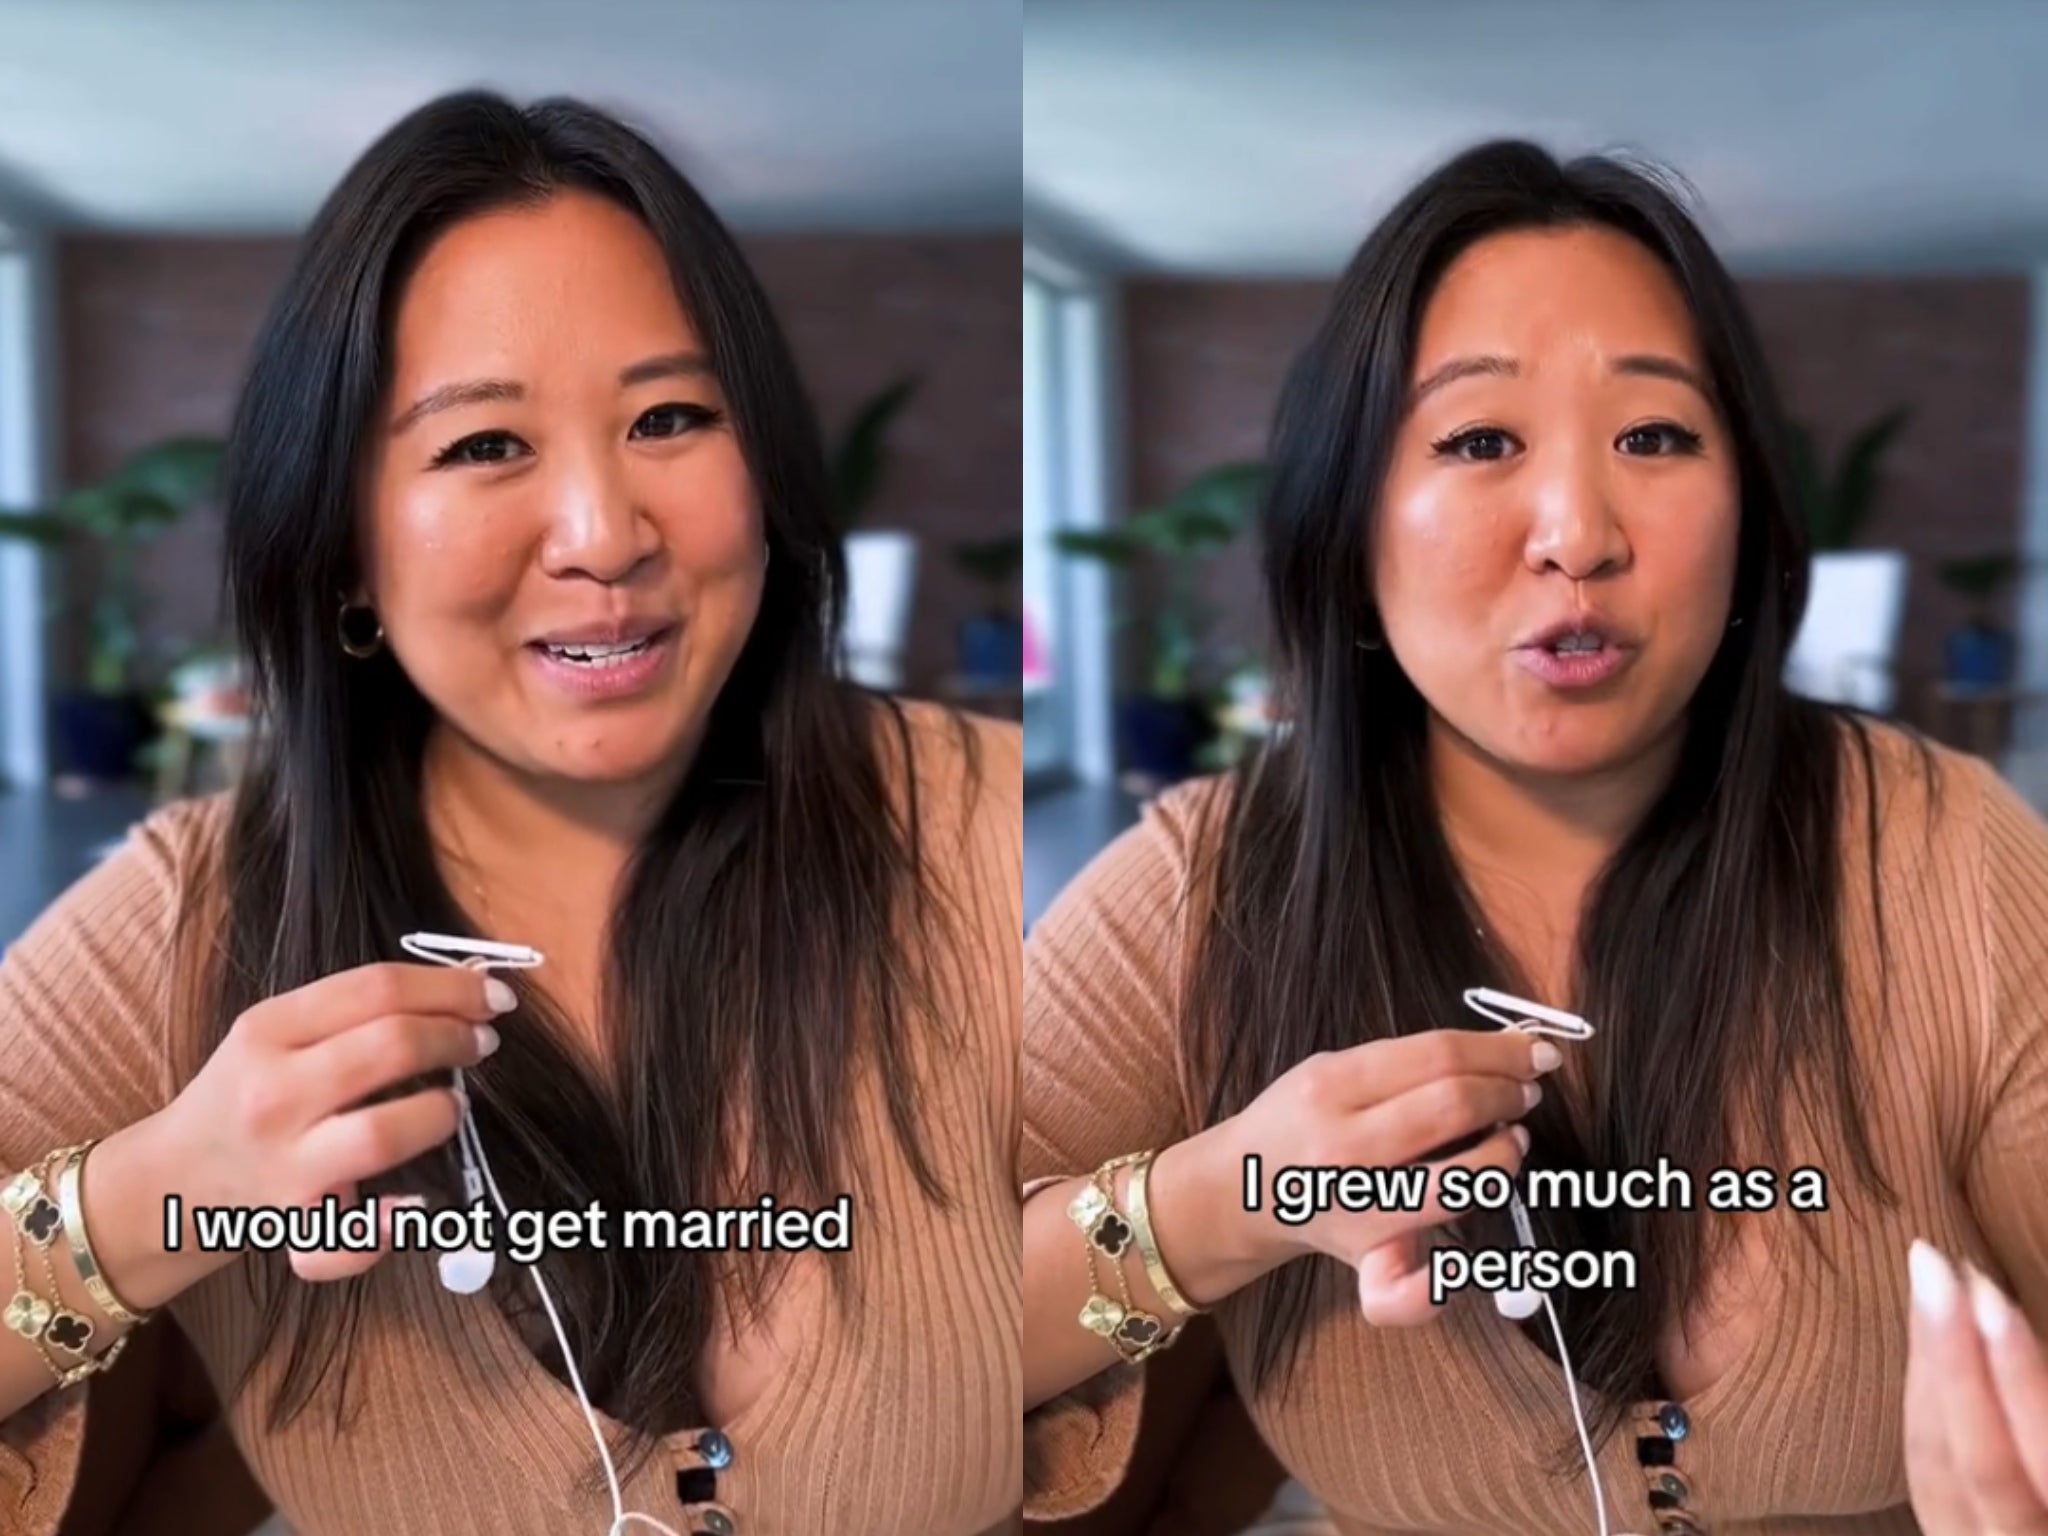 TikToker and entrepreneur Denise Lee shared her experience of getting married in her 20s - and why she wouldn’t do it again